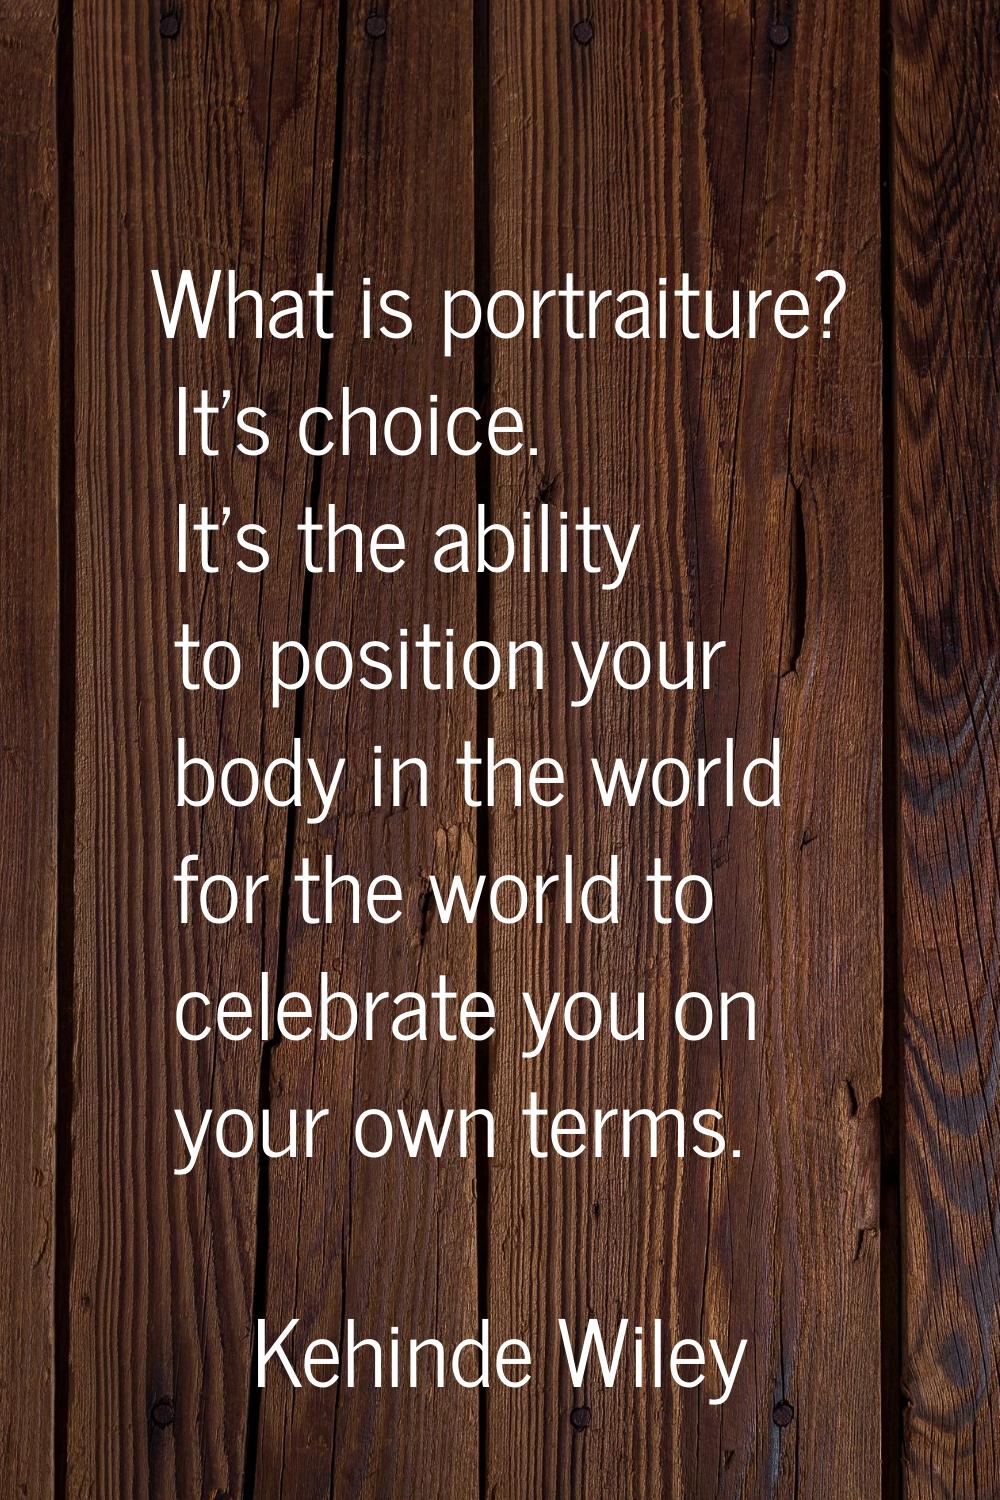 What is portraiture? It's choice. It's the ability to position your body in the world for the world